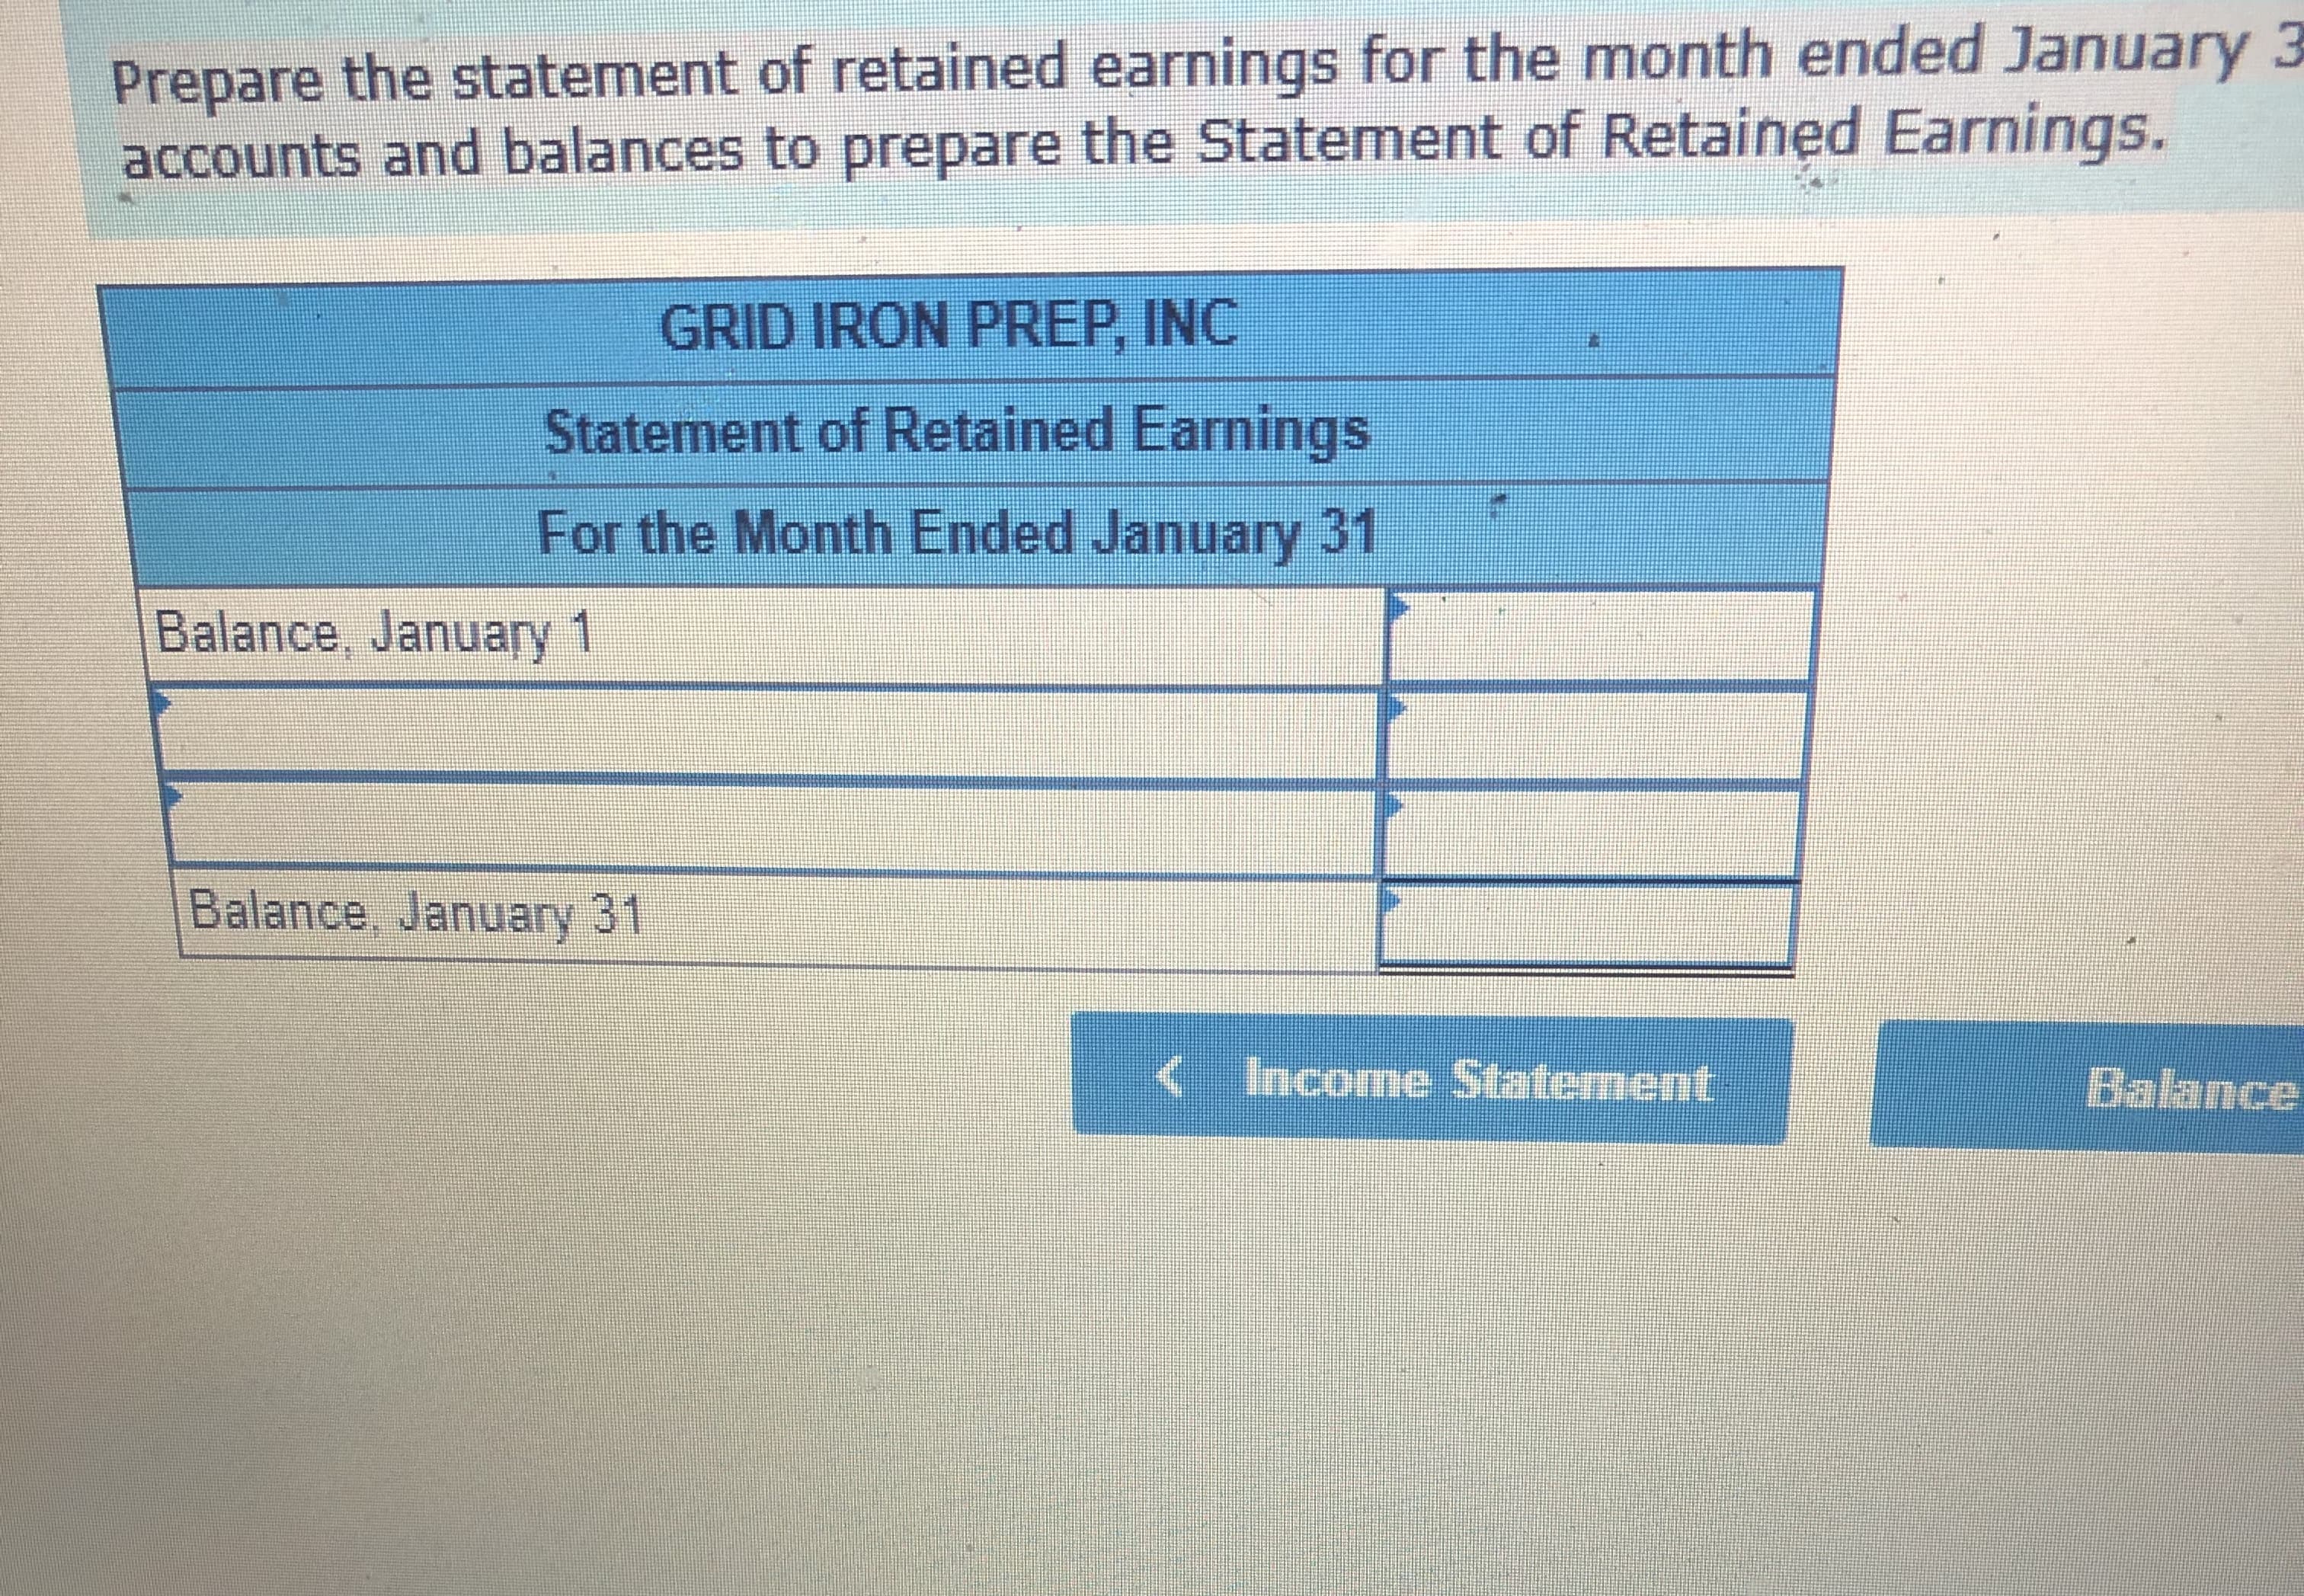 Prepare the statement of retained earnings for the month ended January 3
accounts and balances to prepare the Statement of Retained Earnings.
GRID IRON PREP, INC
Statement of Retained Earnings
For the Month Ended January 31
Balance, January 1
Balance, January 31
<Income Statement
Balance
